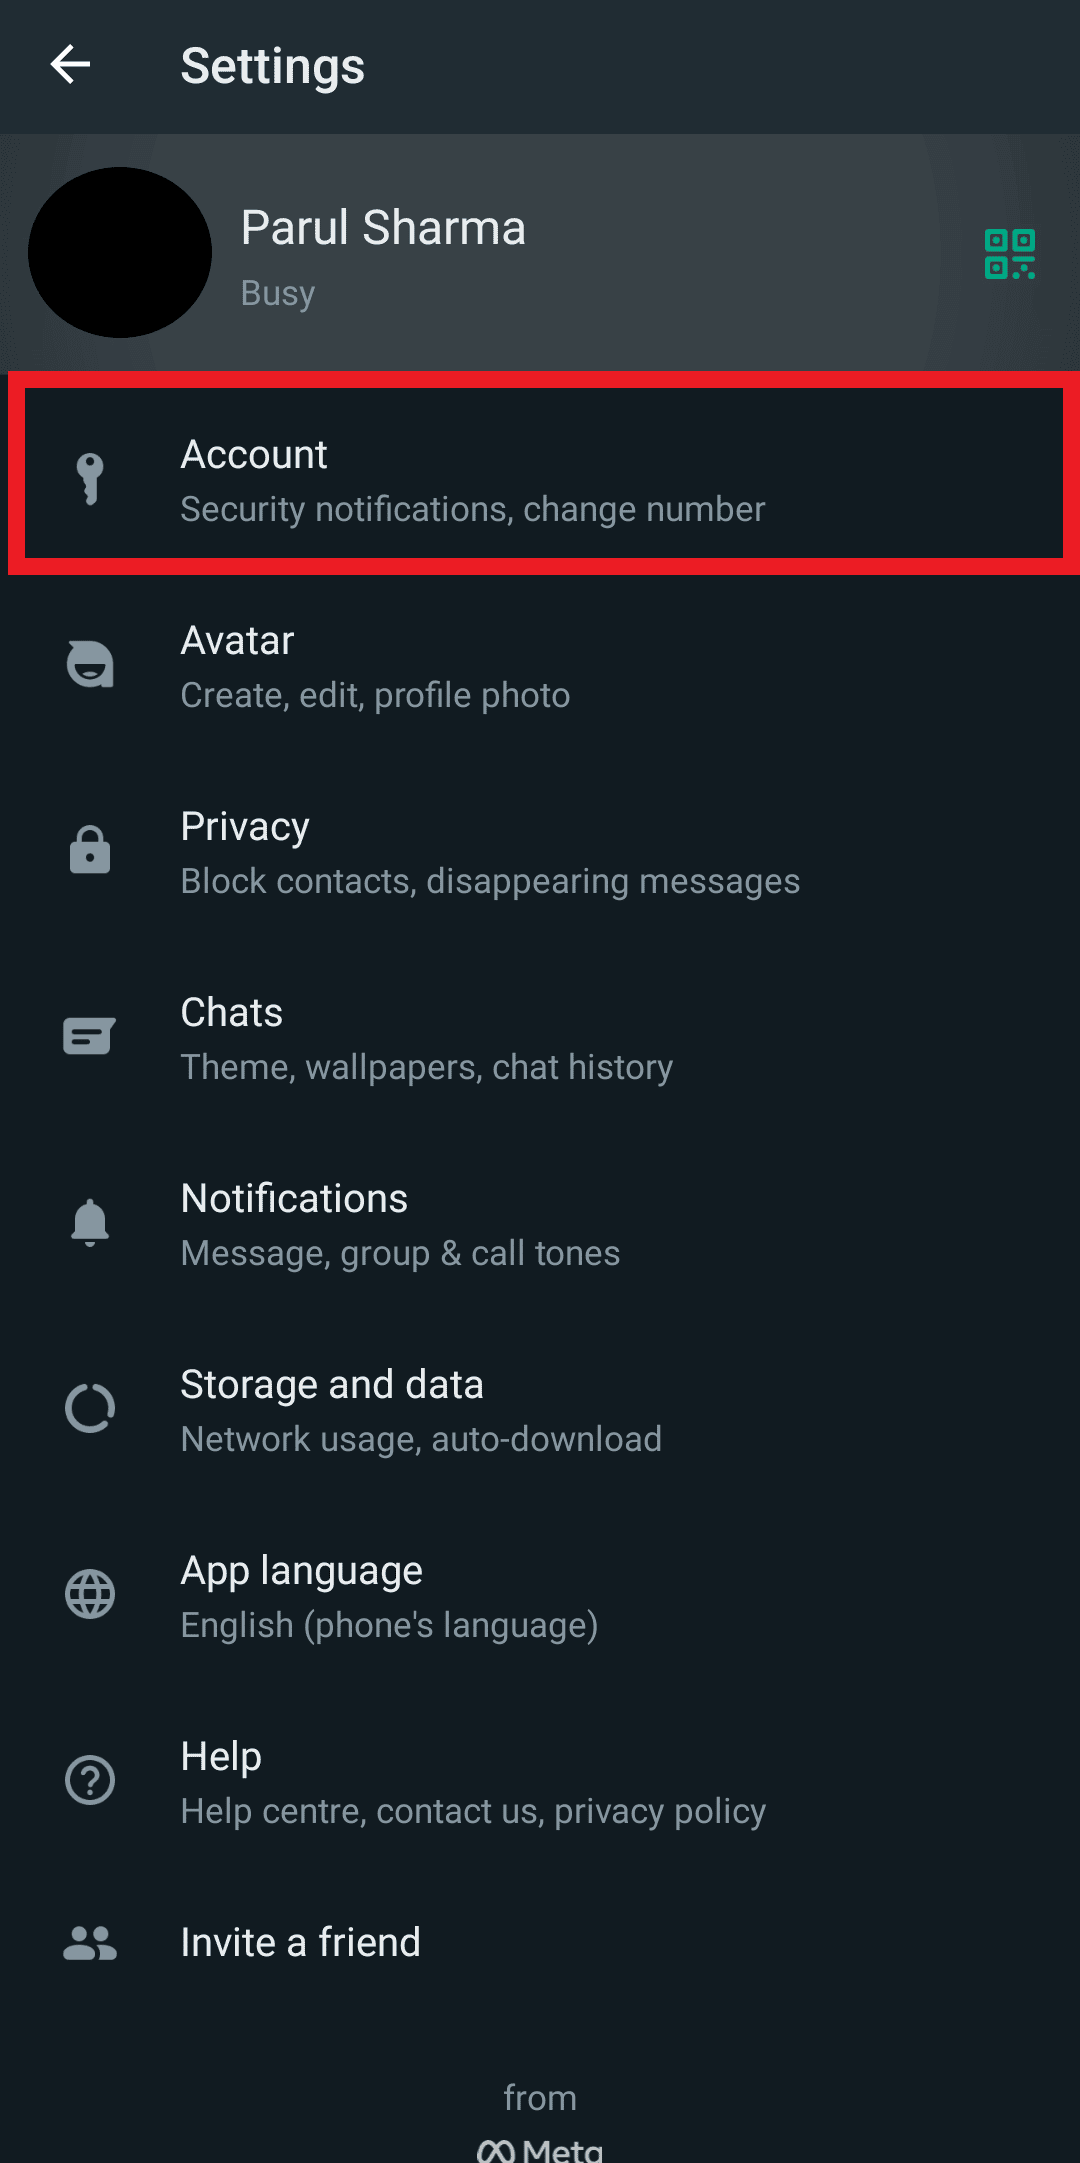 Go to Settings followed by Account